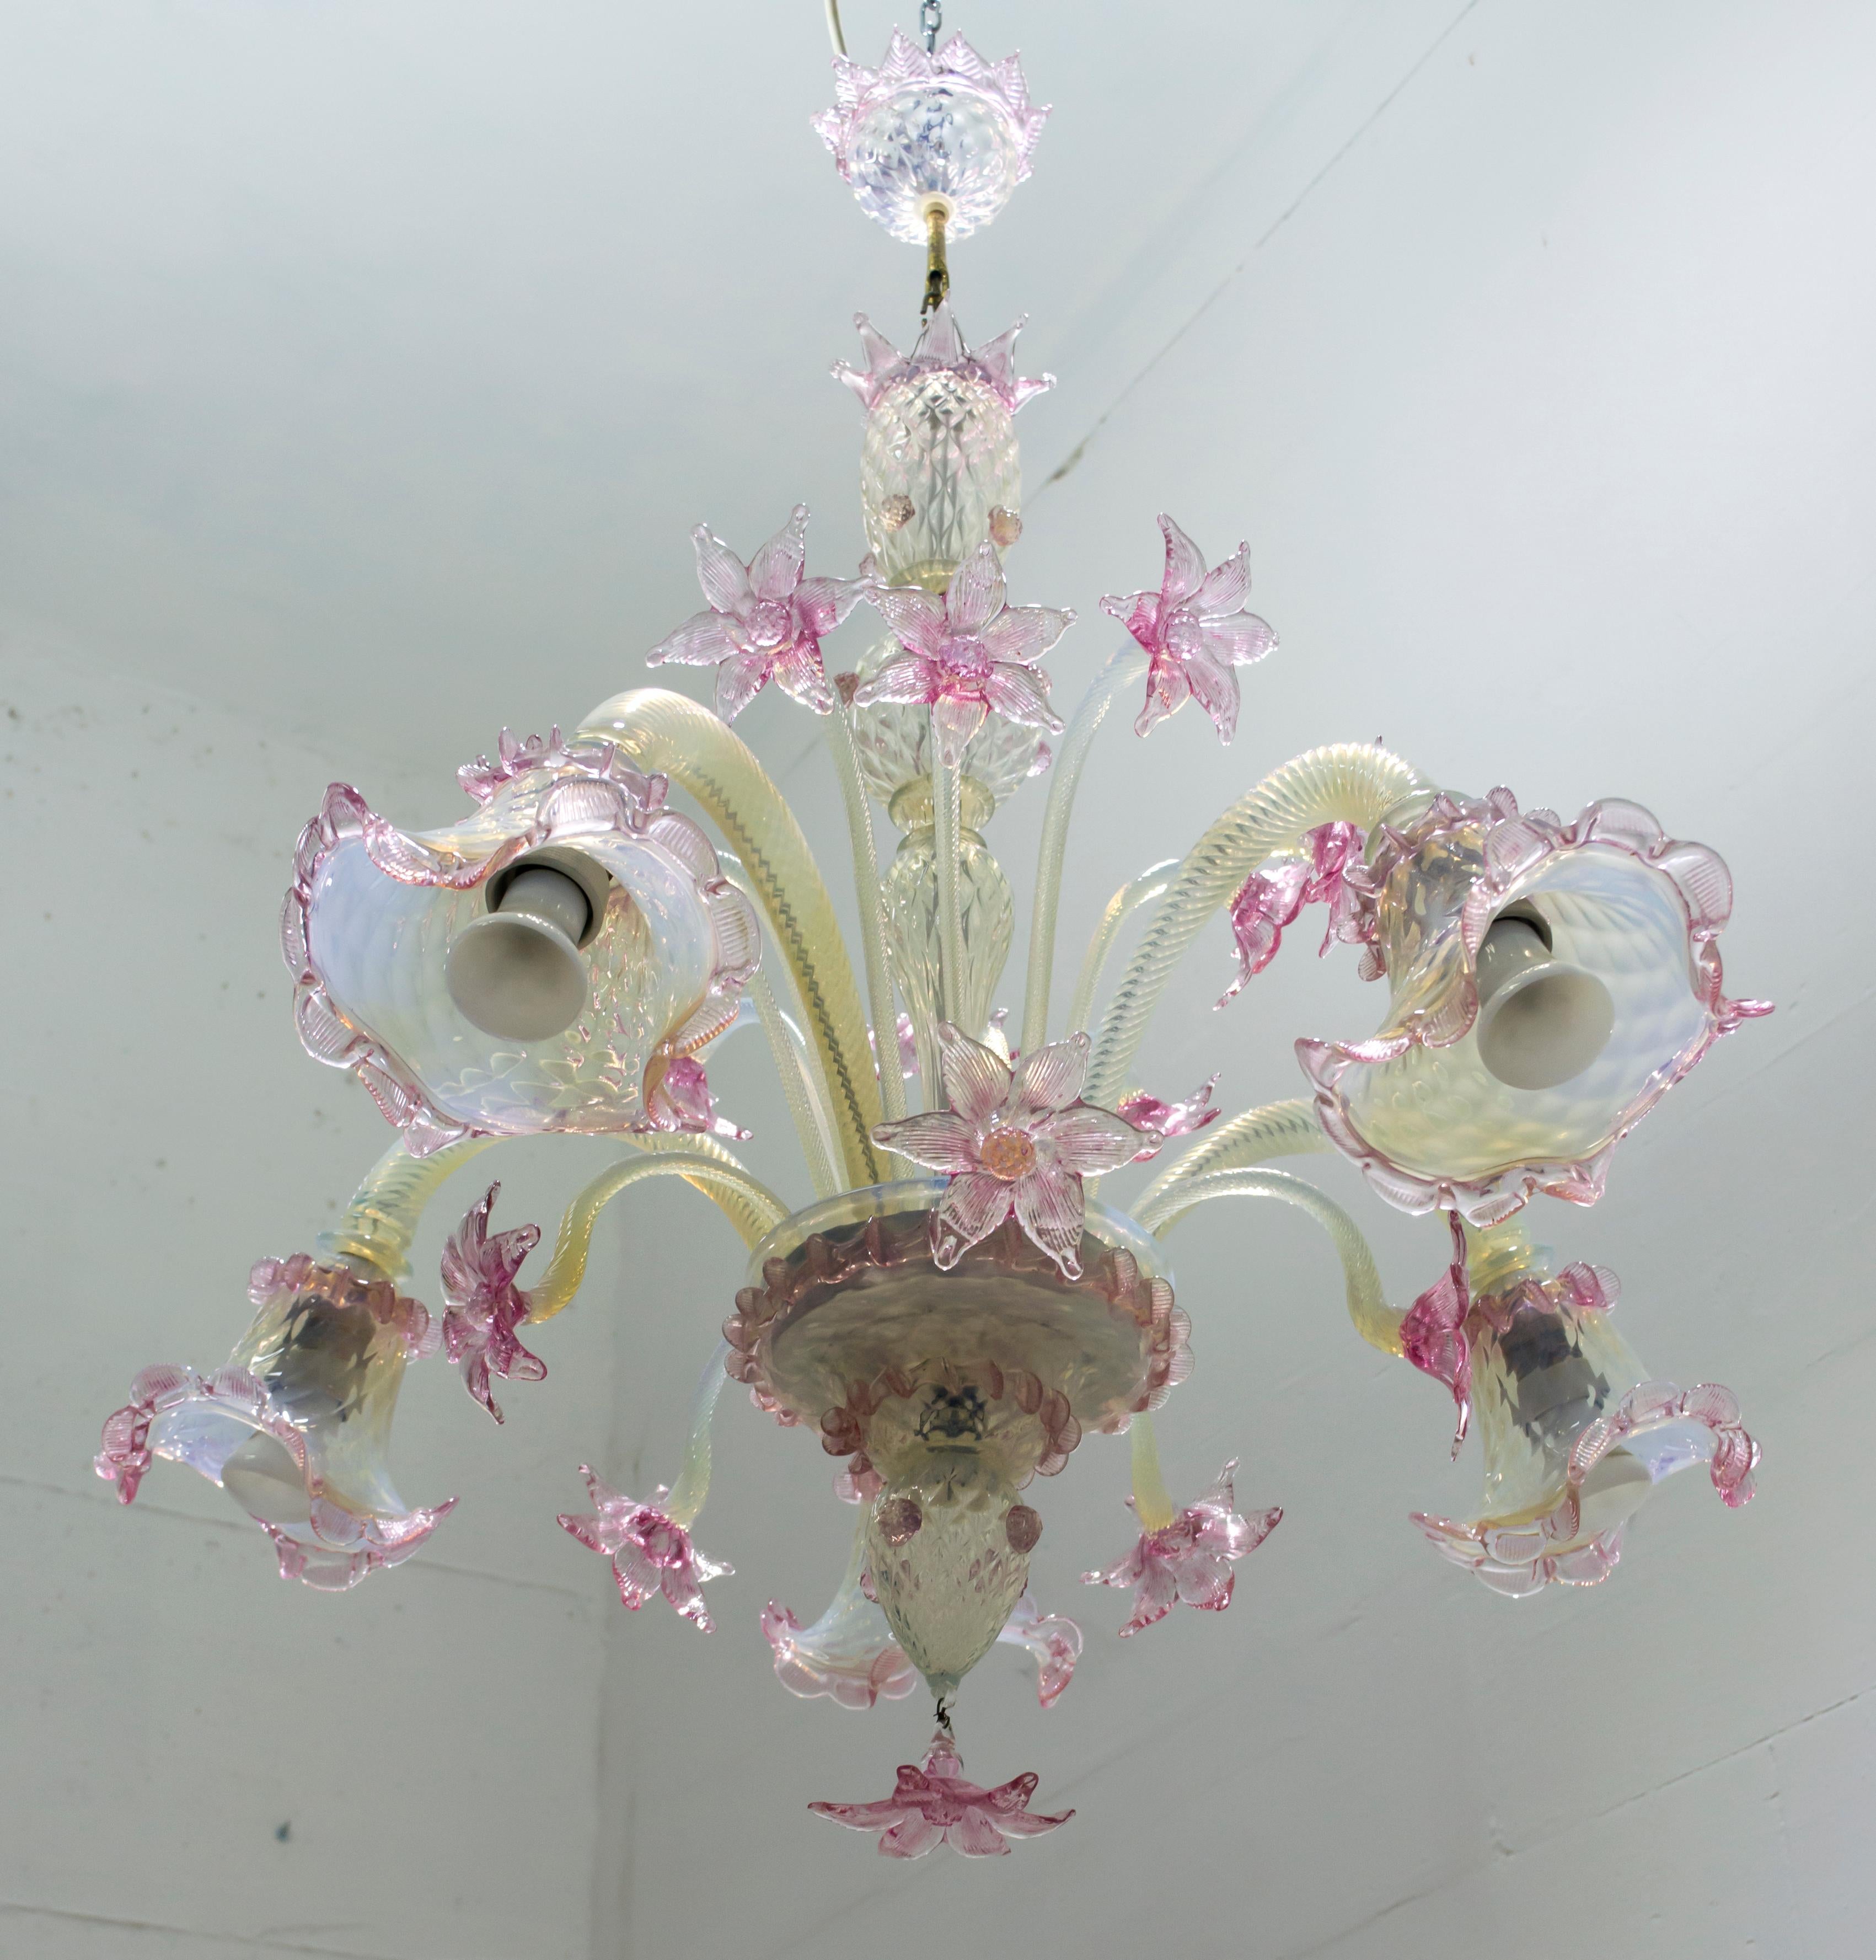 An elegant five-light chandelier in Murano glass with transparent colors and sophisticated finishes in pink and ivory. With a centered bulbous column that emits branches and flowers and finely cuts the Murano glass leaves.

Ca'Rezzonico is the